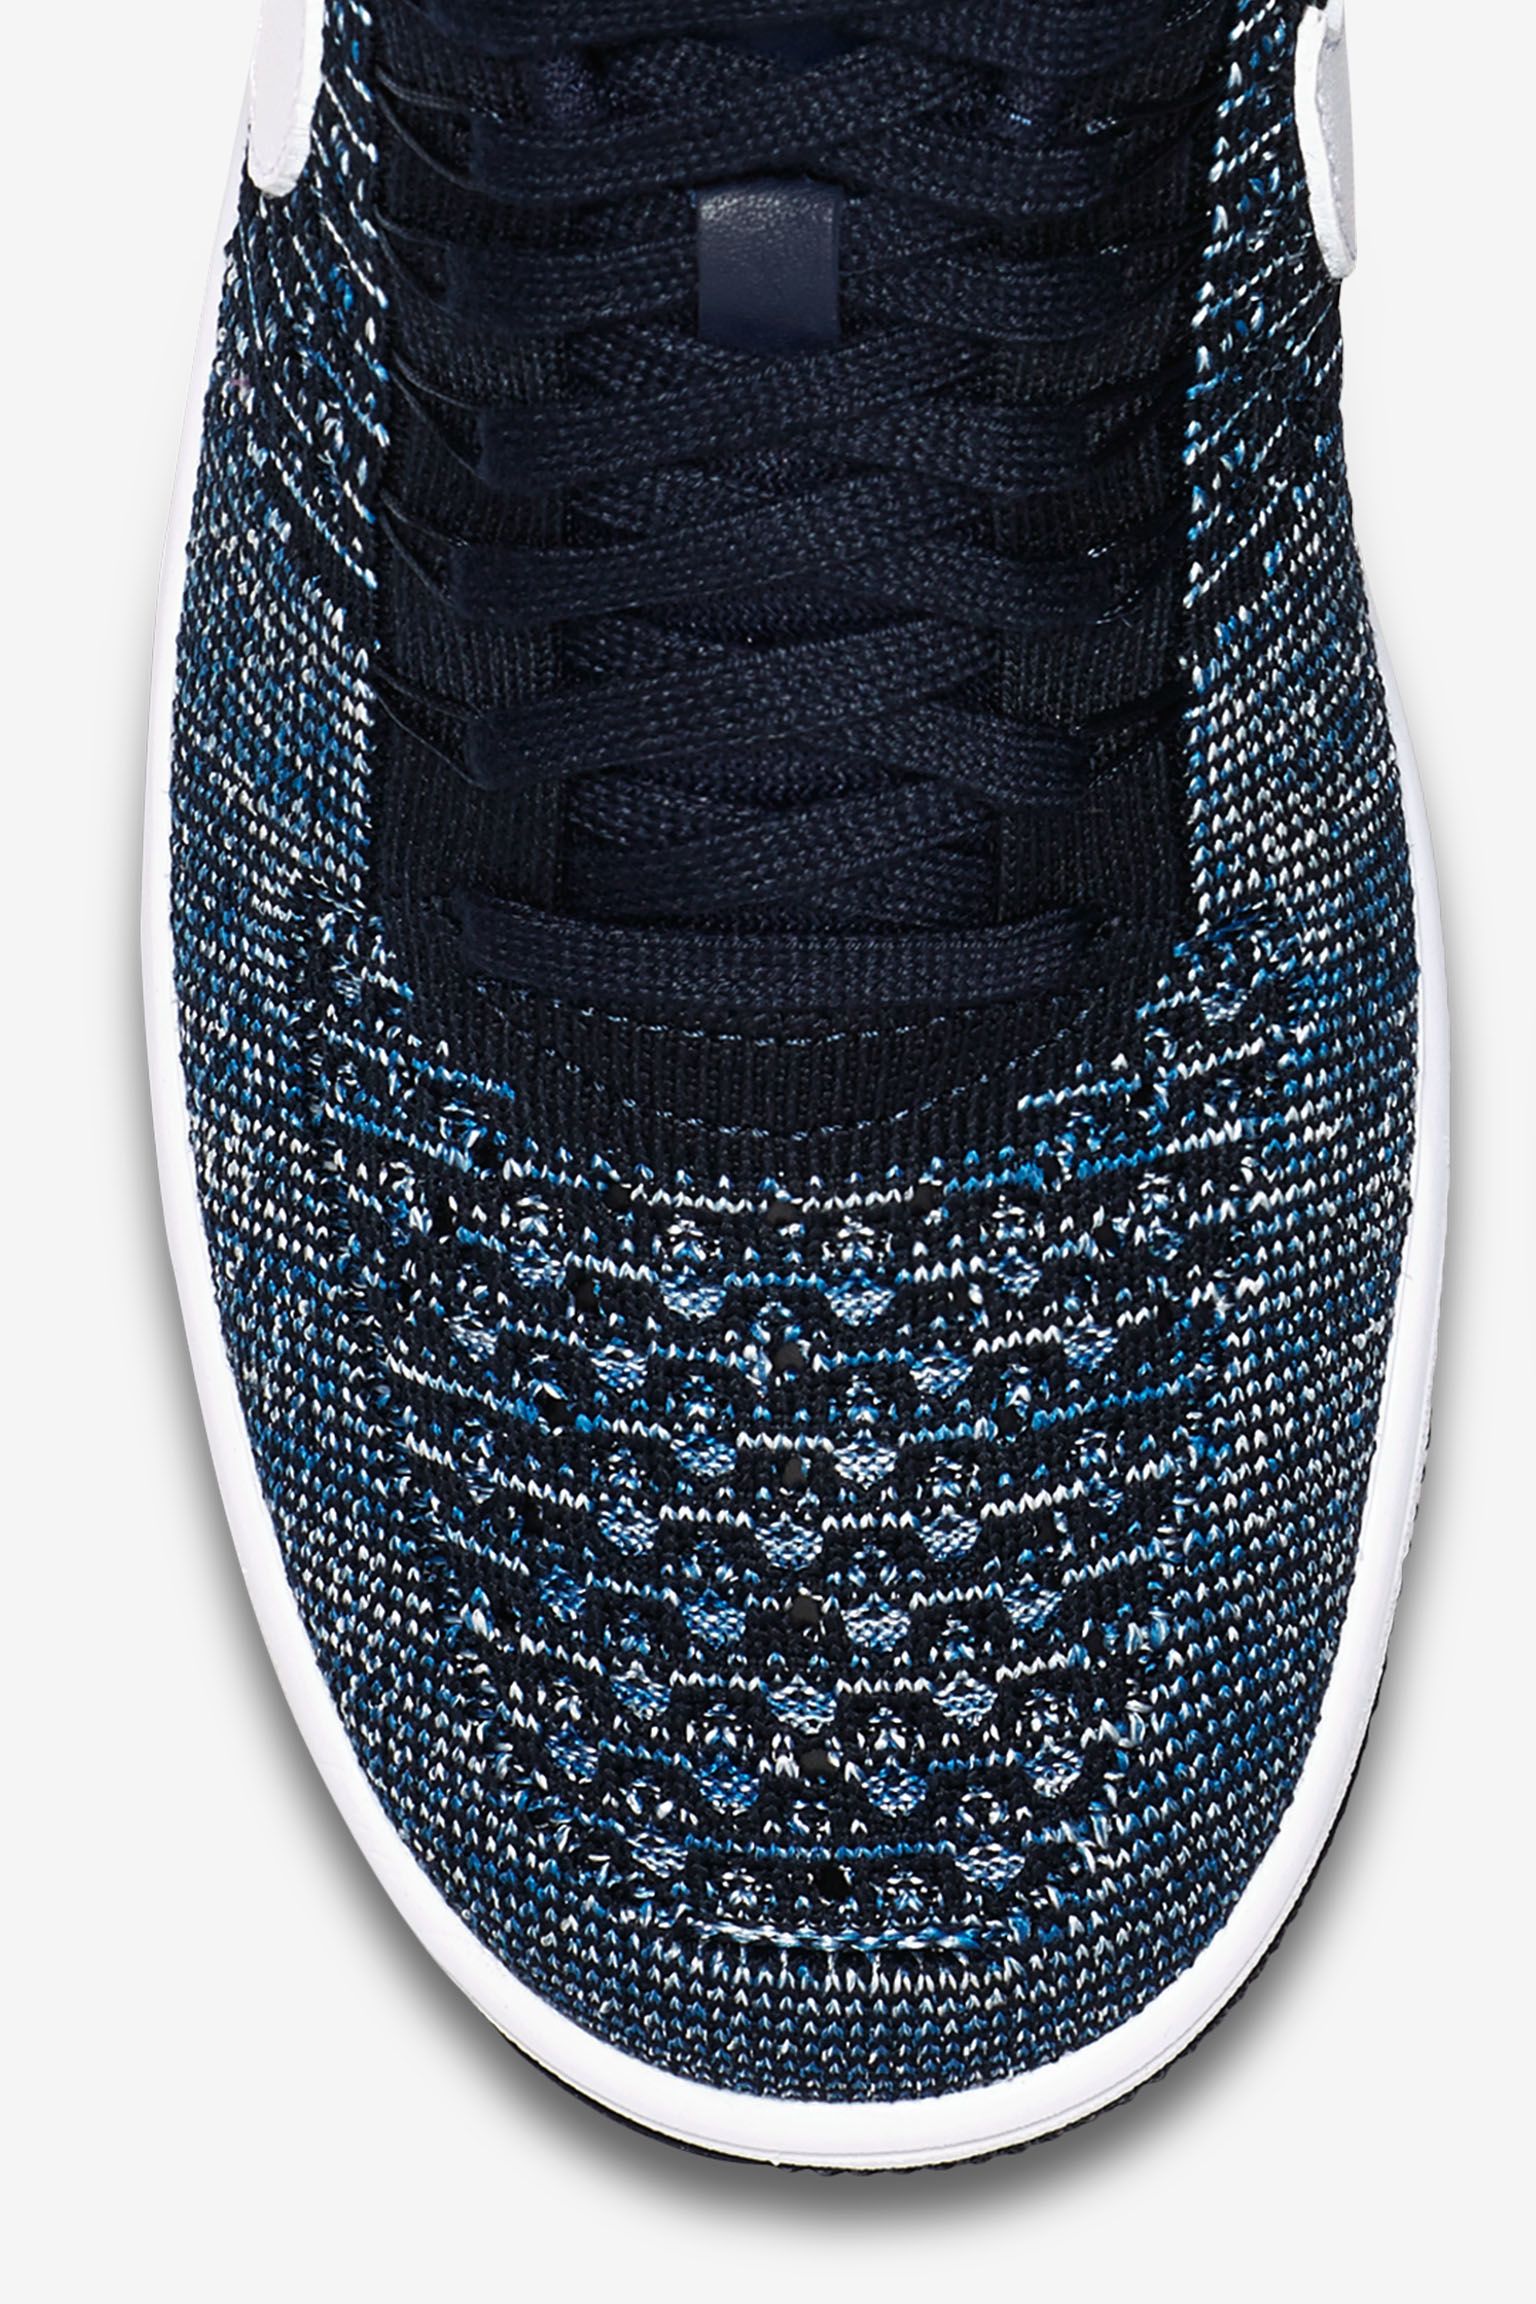 nike air force 1 ultra flyknit colors